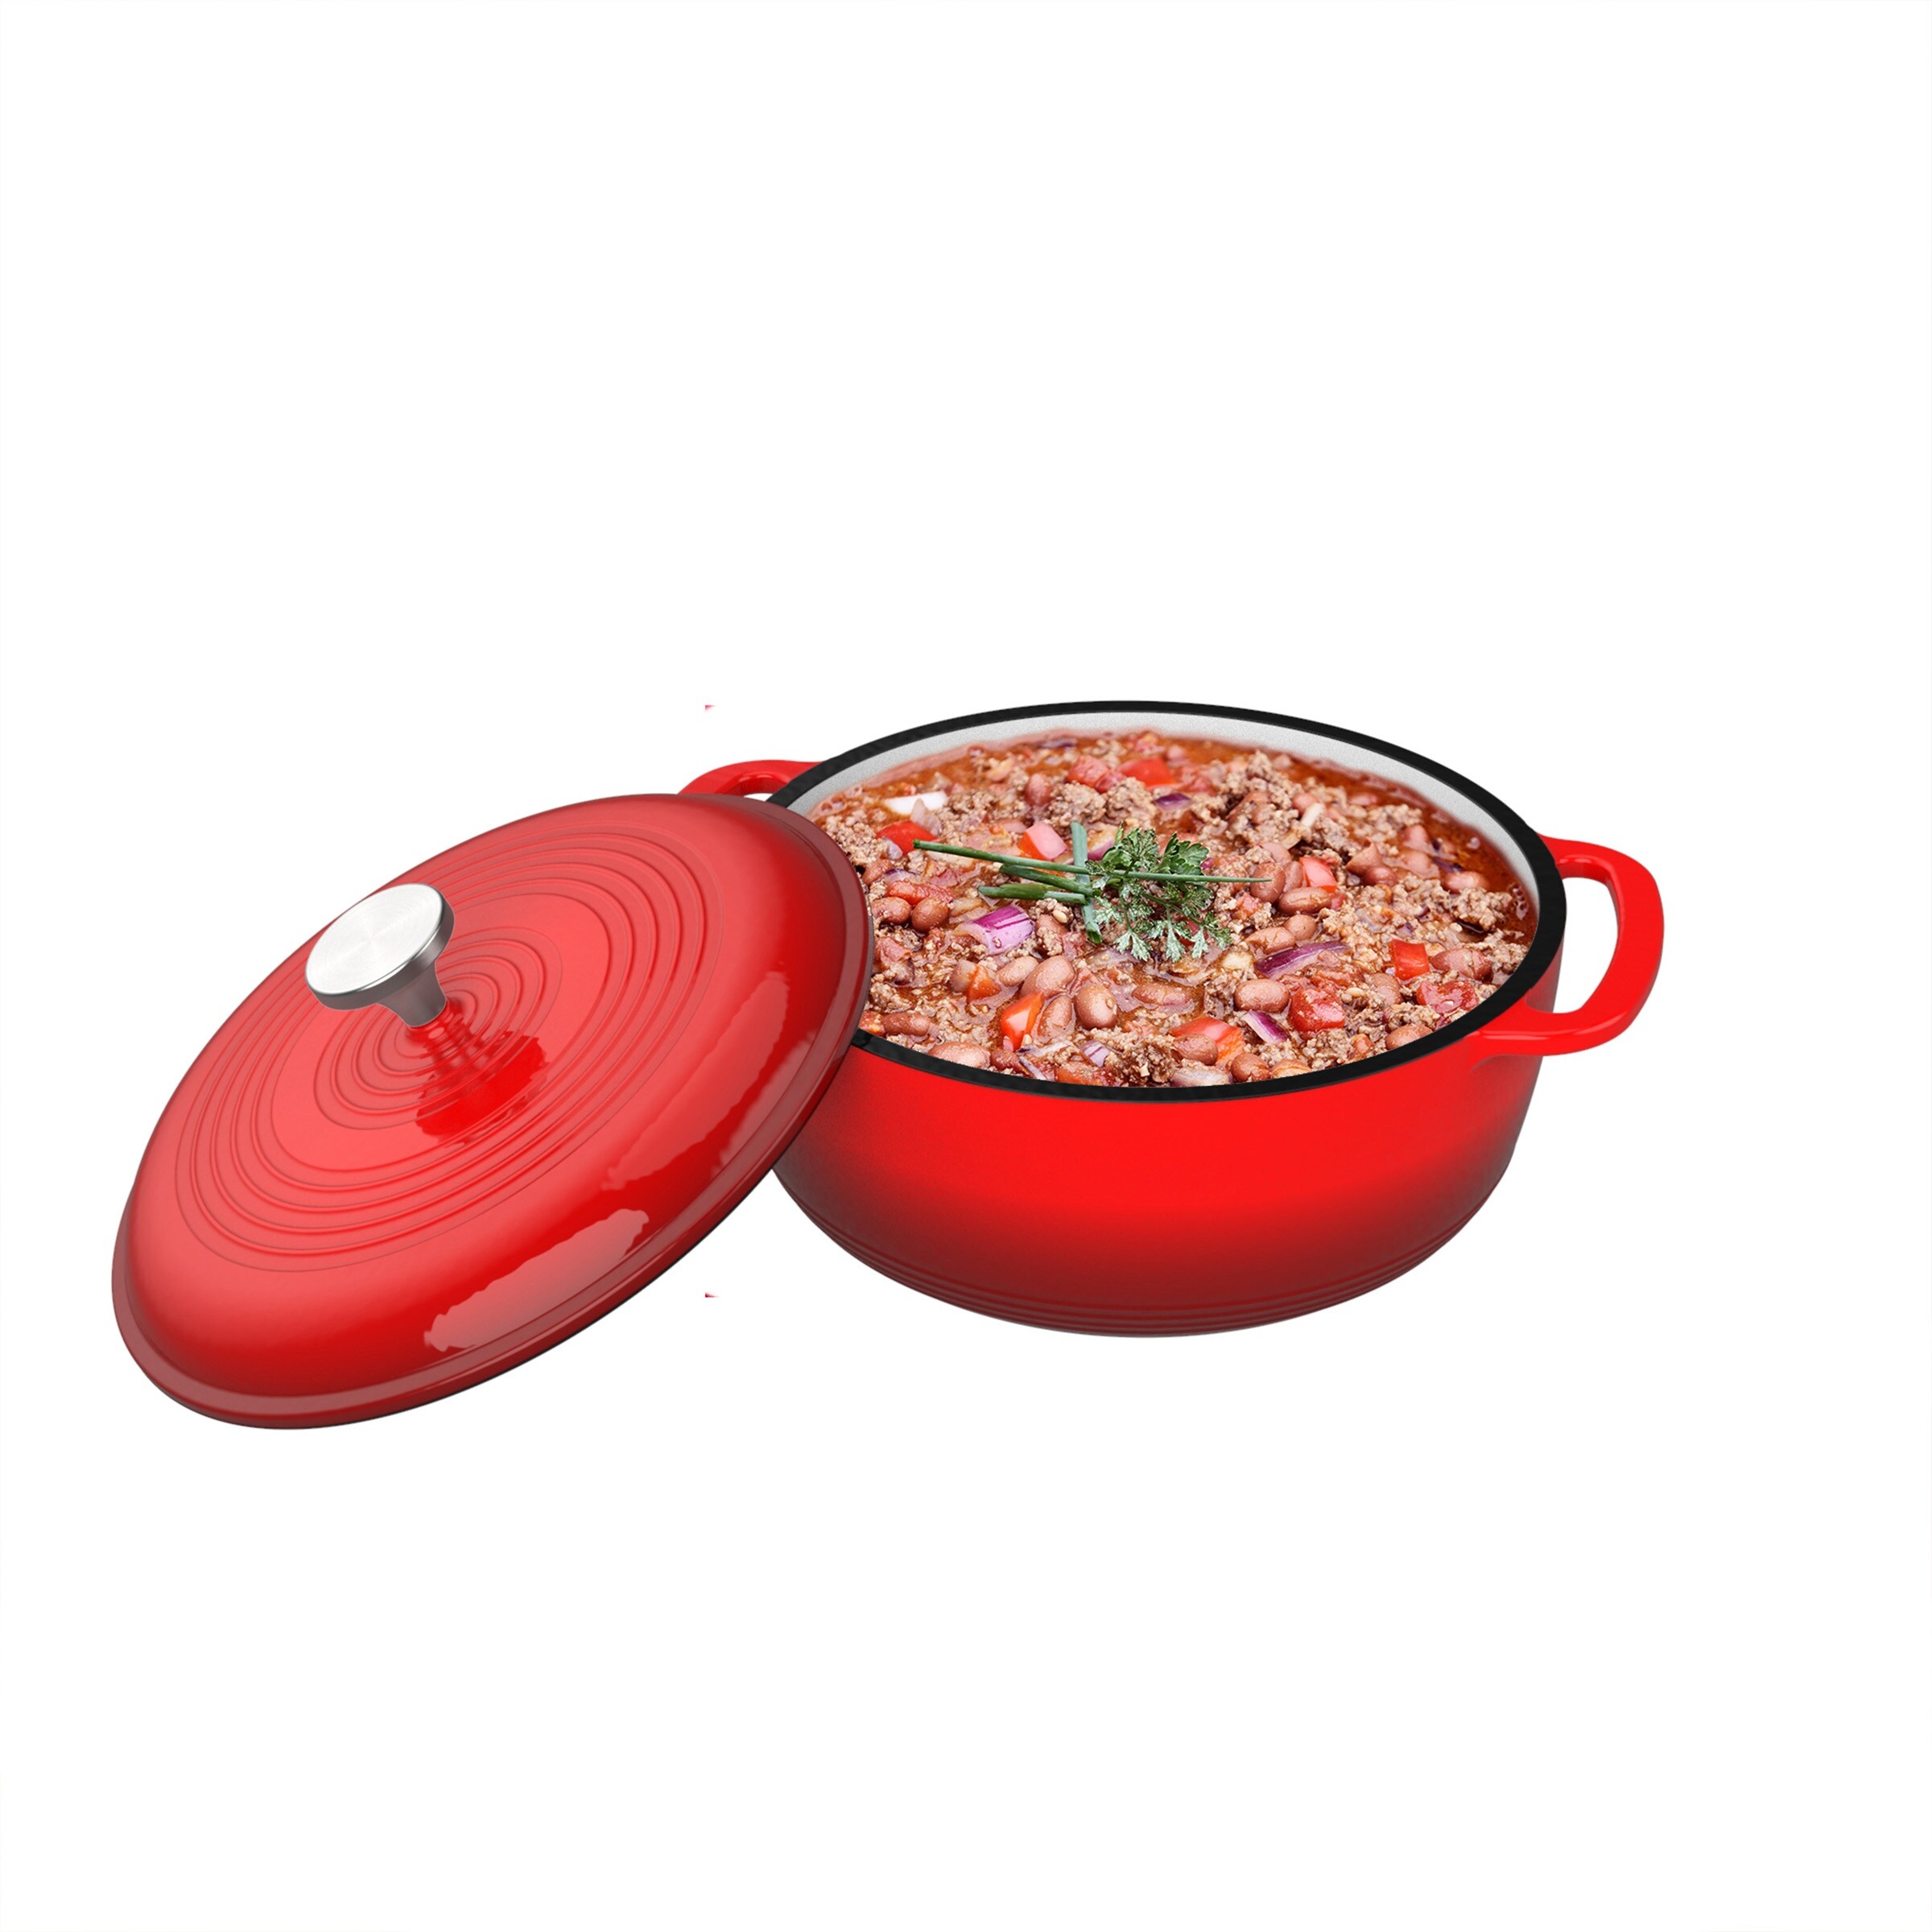 https://ak1.ostkcdn.com/images/products/is/images/direct/fa820a96b89cdcf057d9e0568122a54c01665670/Cast-Iron-Dutch-Oven-with-Enamel-Coated-Pot-for-Oven-or-Stovetop.jpg